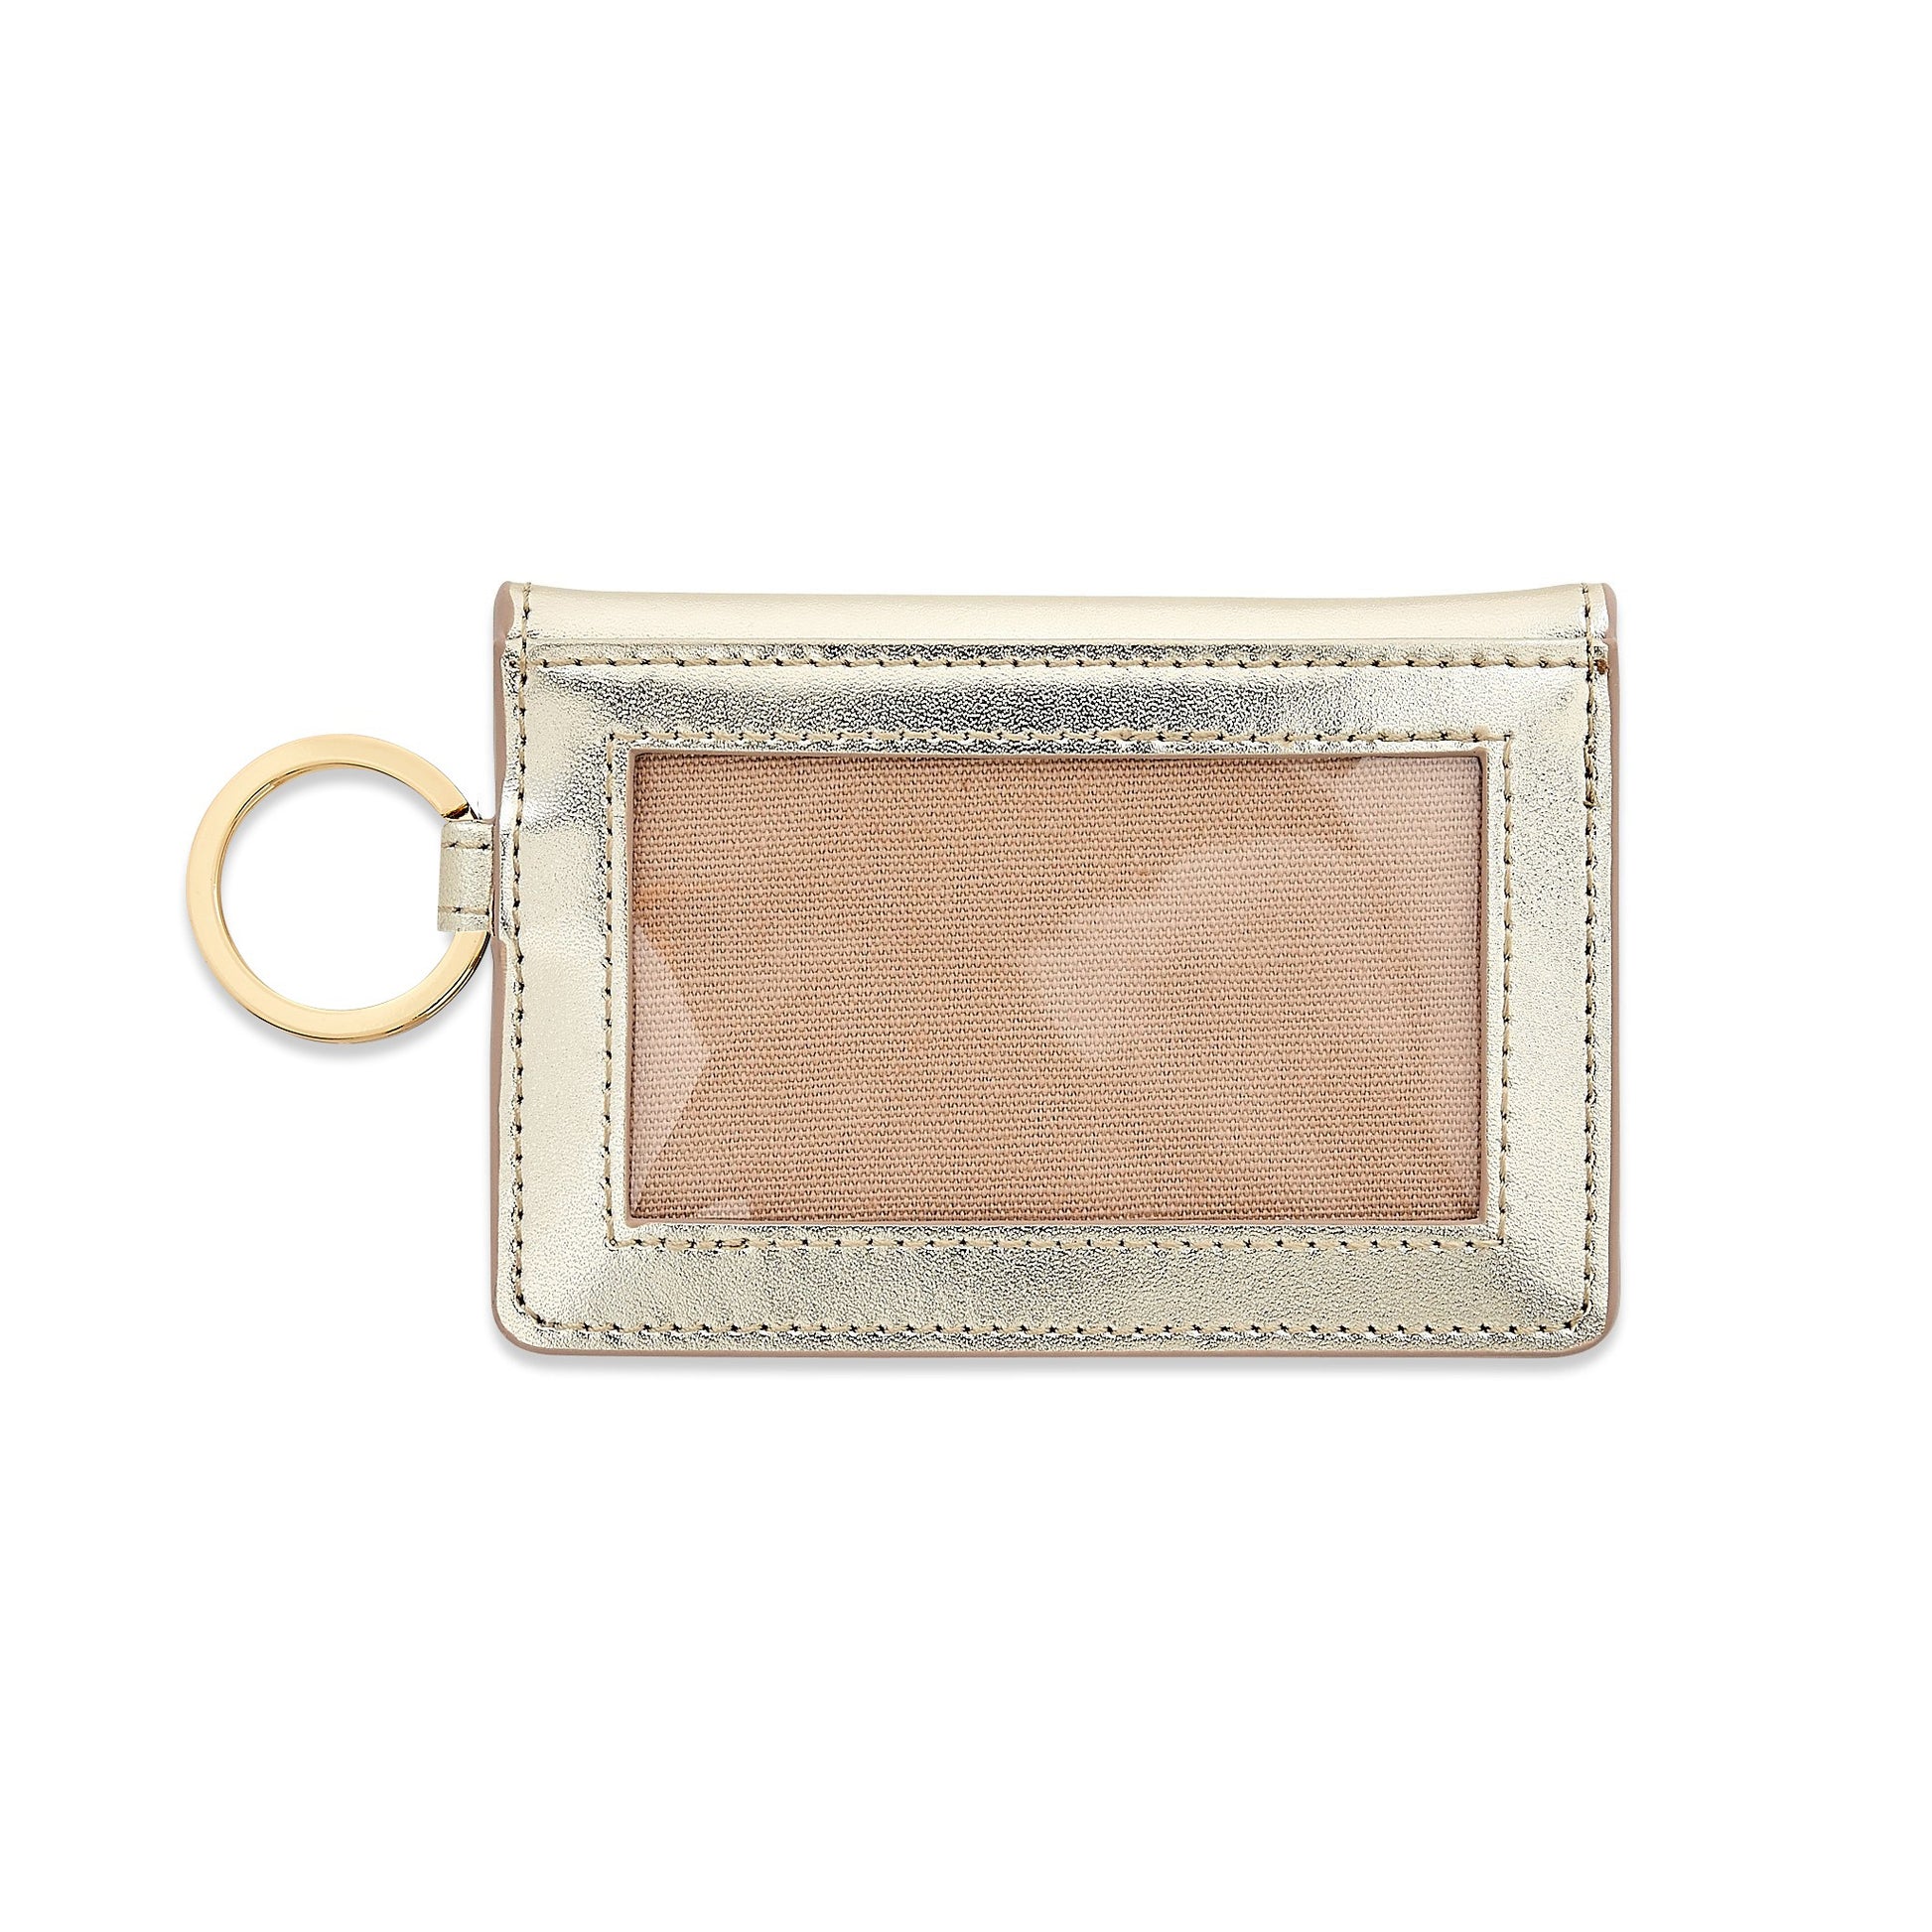 Gold leather bifold Keychain Wallet with compartments showing back side with clear window for id